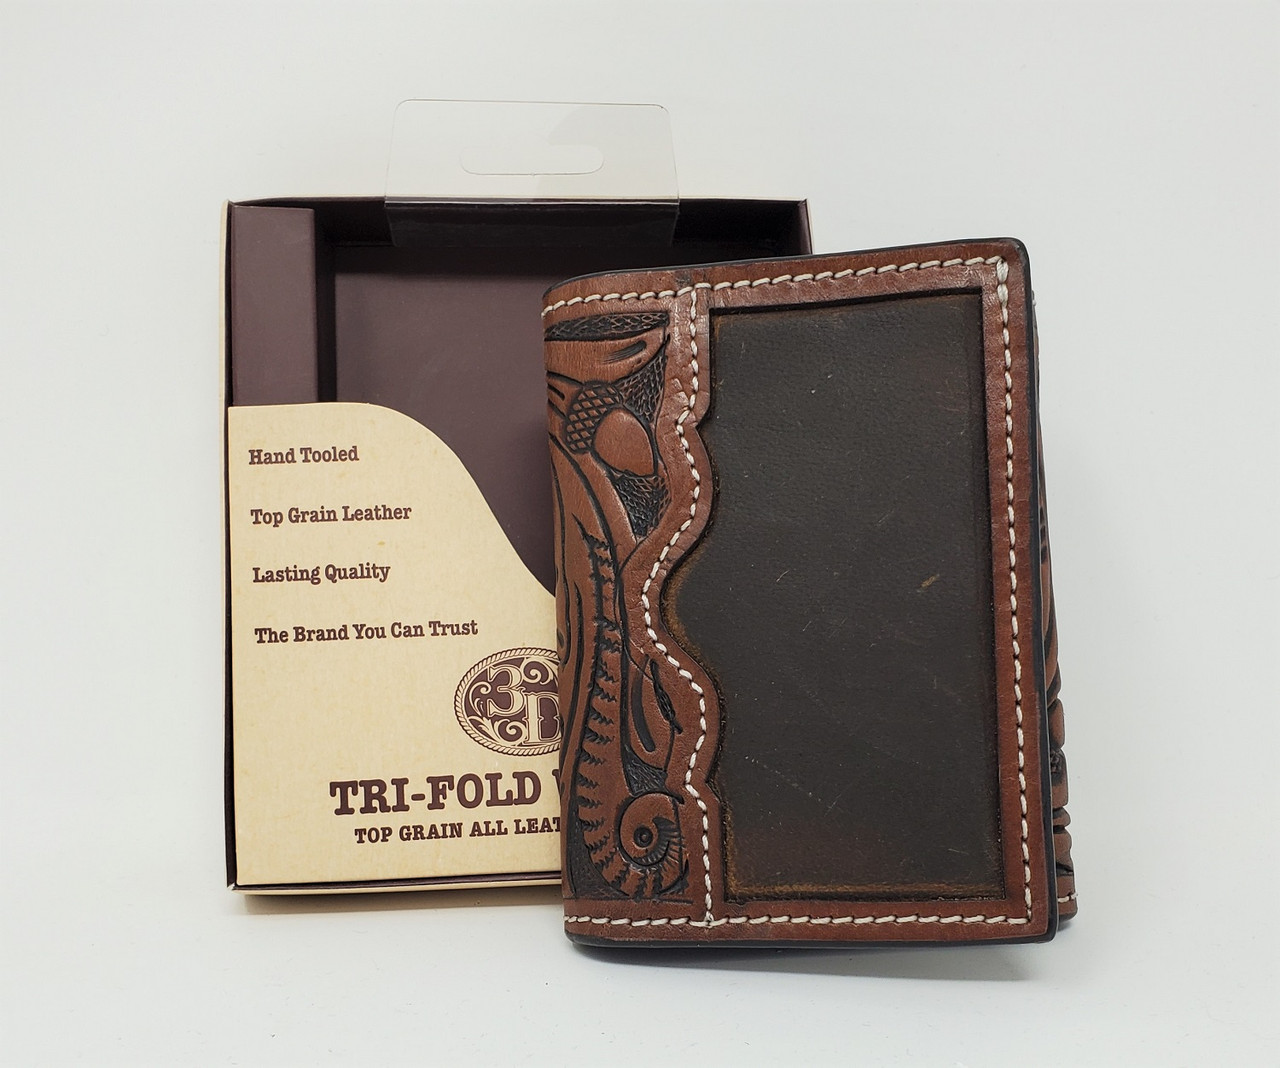 Nocona Men's Tooled leather Trifold Western Wallet